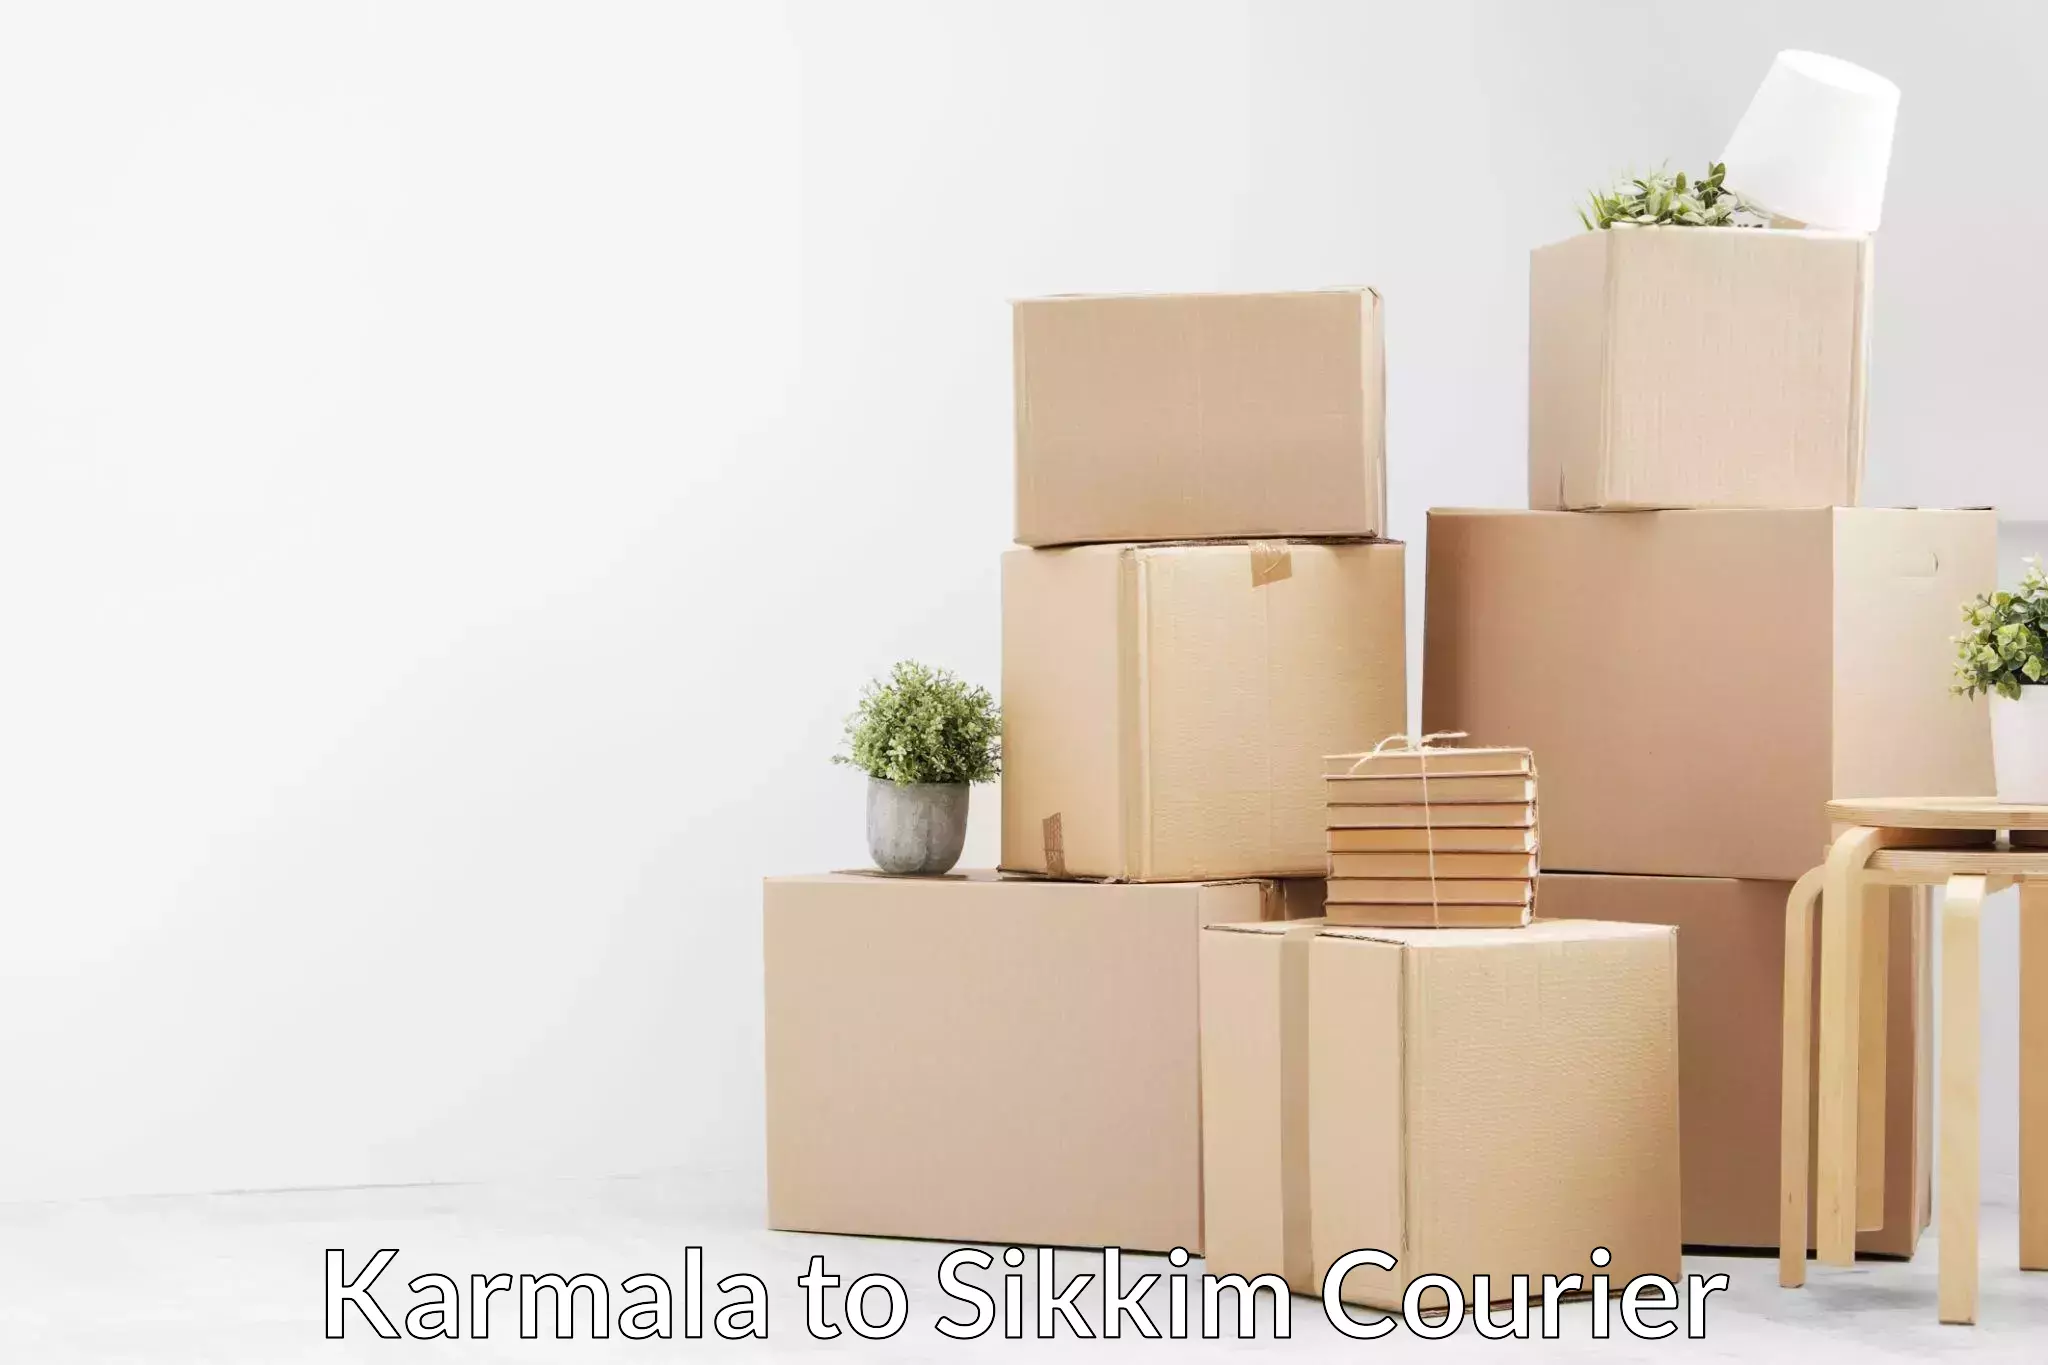 Moving and handling services Karmala to Pelling